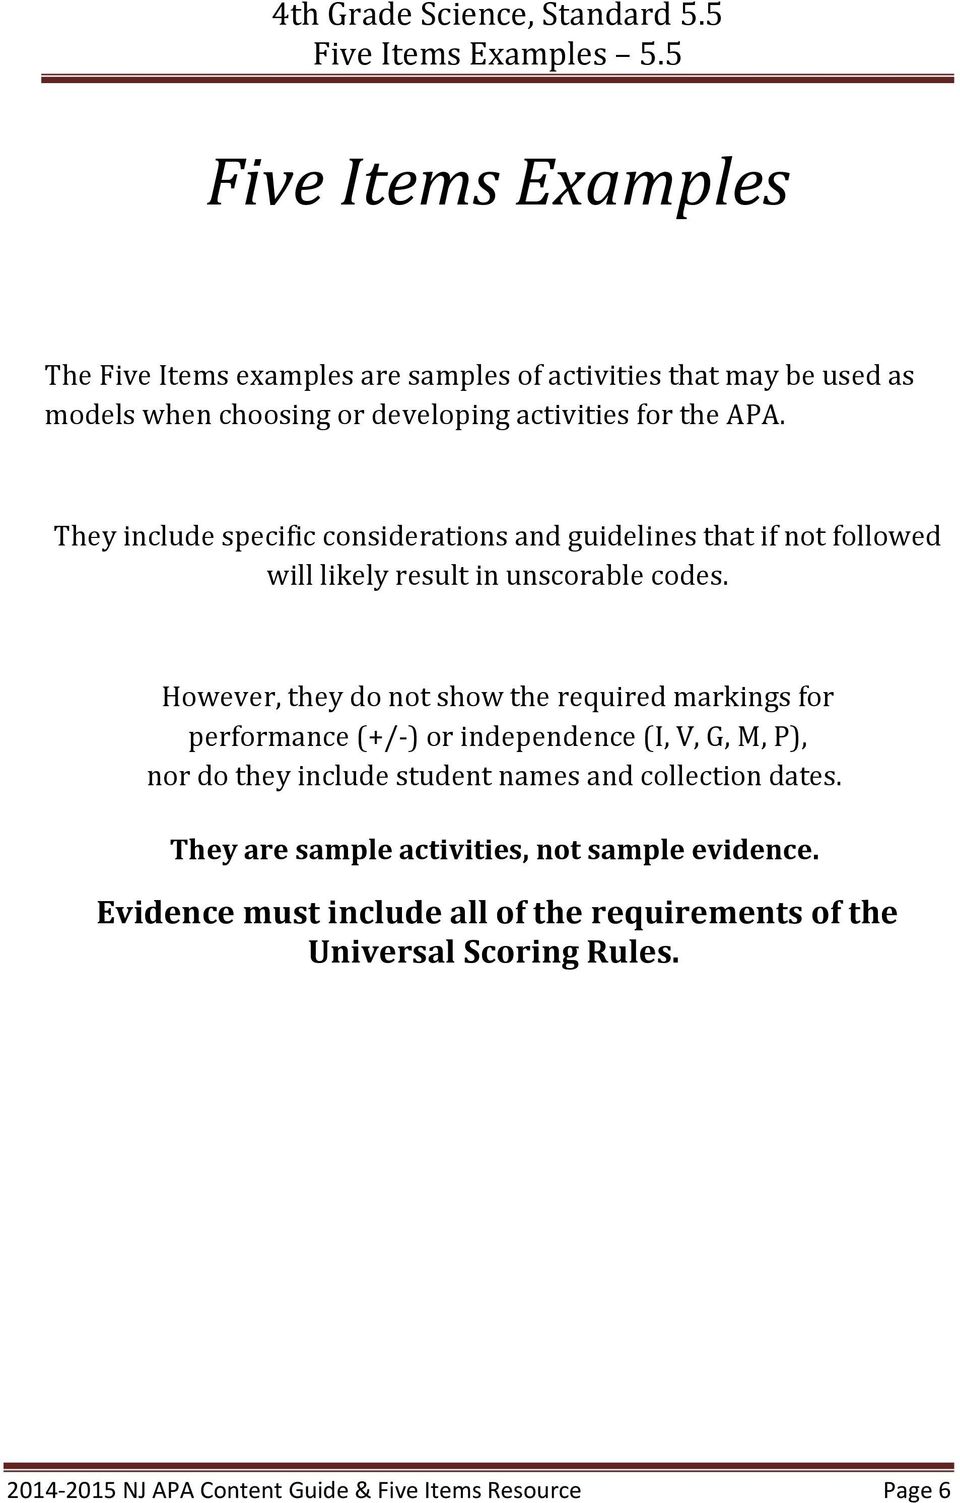 However, they do not show the required markings for performance (+/-) or independence (I, V, G, M, P), nor do they include student names and collection